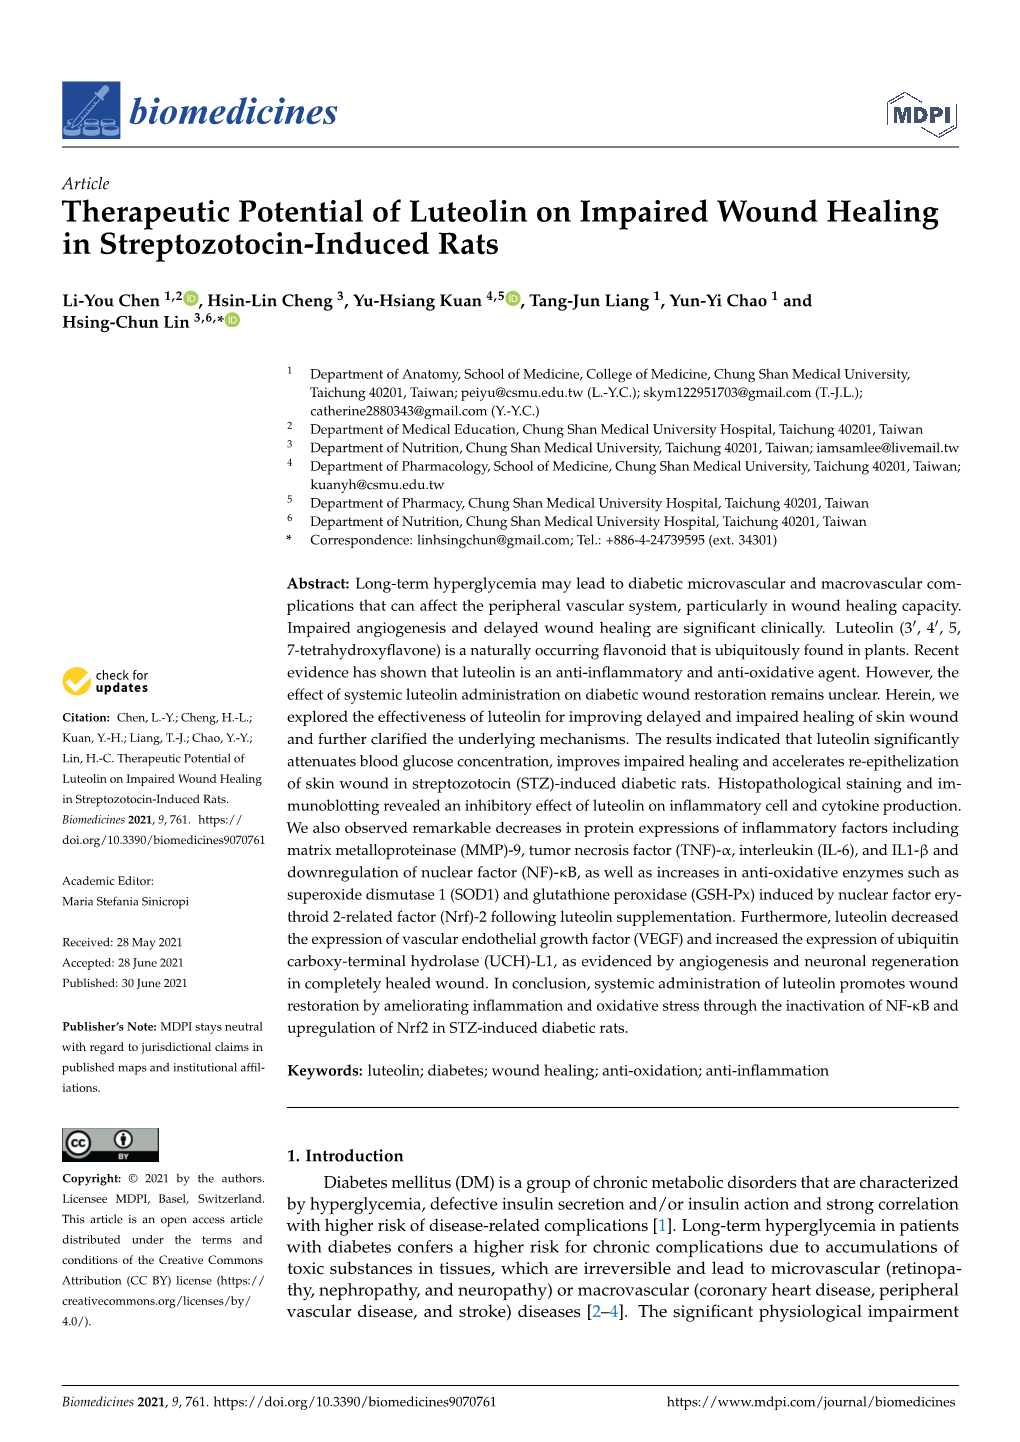 Therapeutic Potential of Luteolin on Impaired Wound Healing in Streptozotocin-Induced Rats